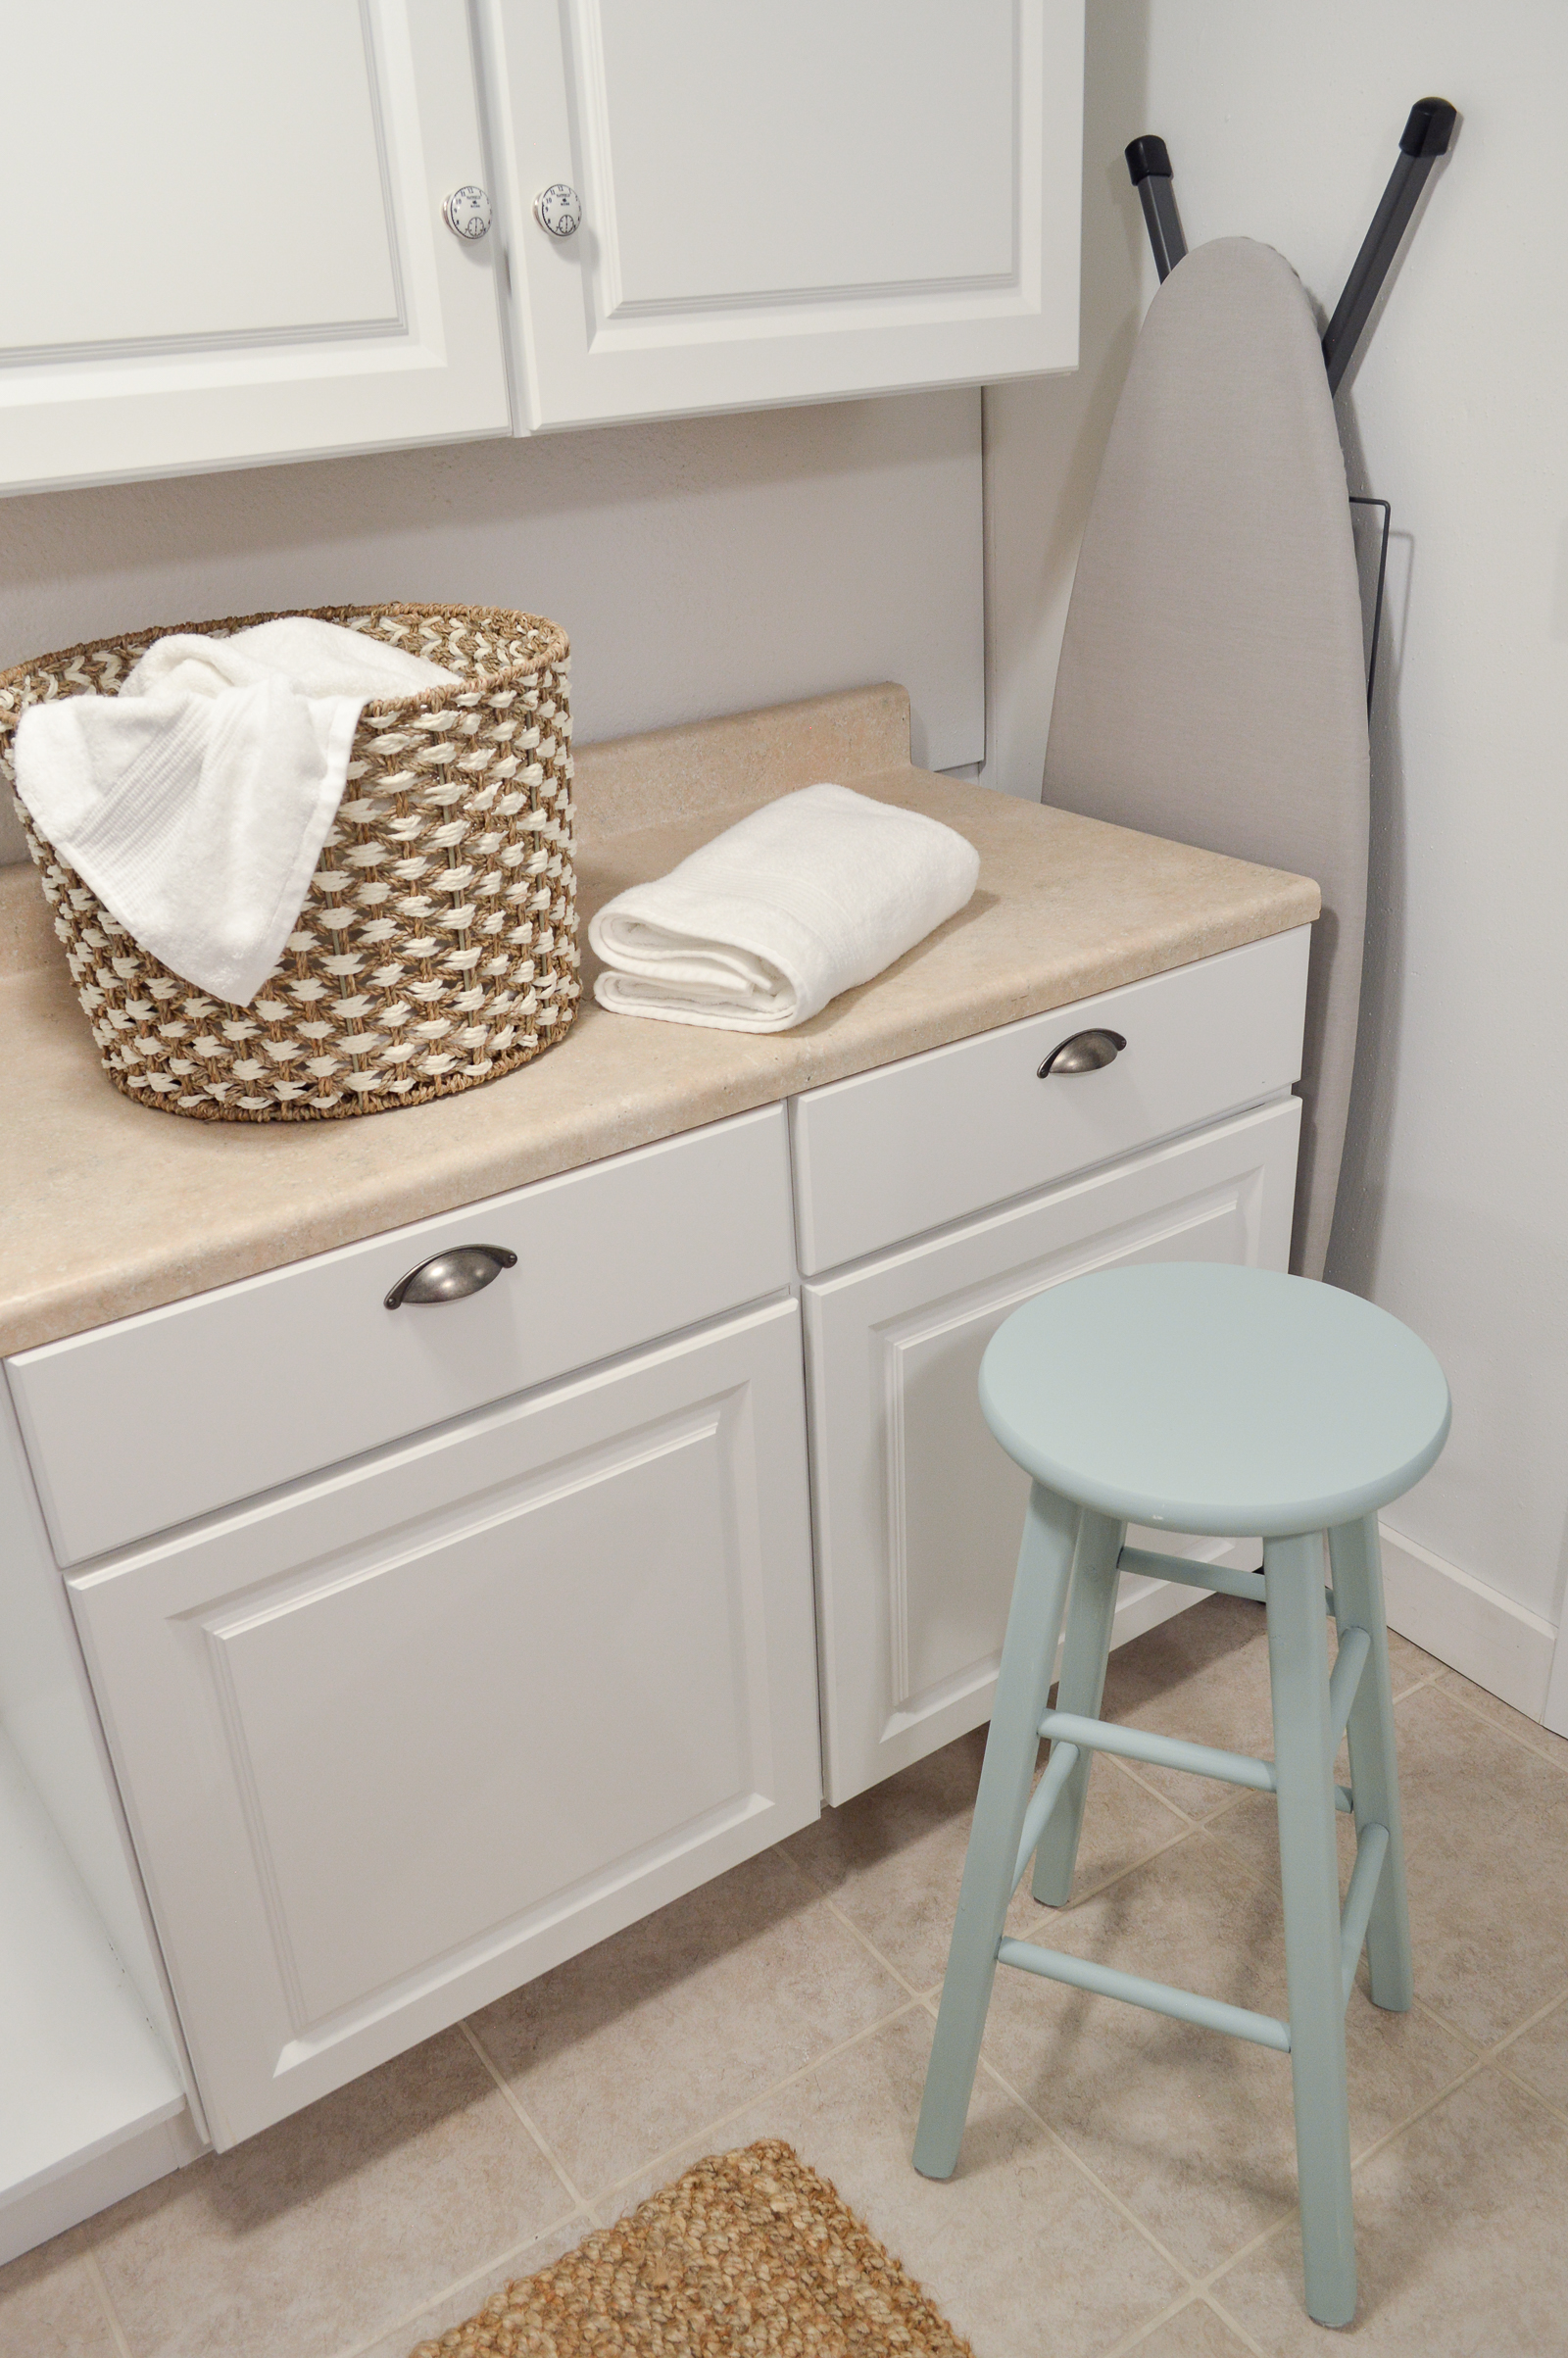 Small Space Combination Laundry Room Powder Bathroom Refresh - Simple, Organized Cottage Farmhouse Makeover with affordable pieces from the Better Homes & Gardens line at Walmart #sponsored | Details and sources www.foxhollowcottage.com 